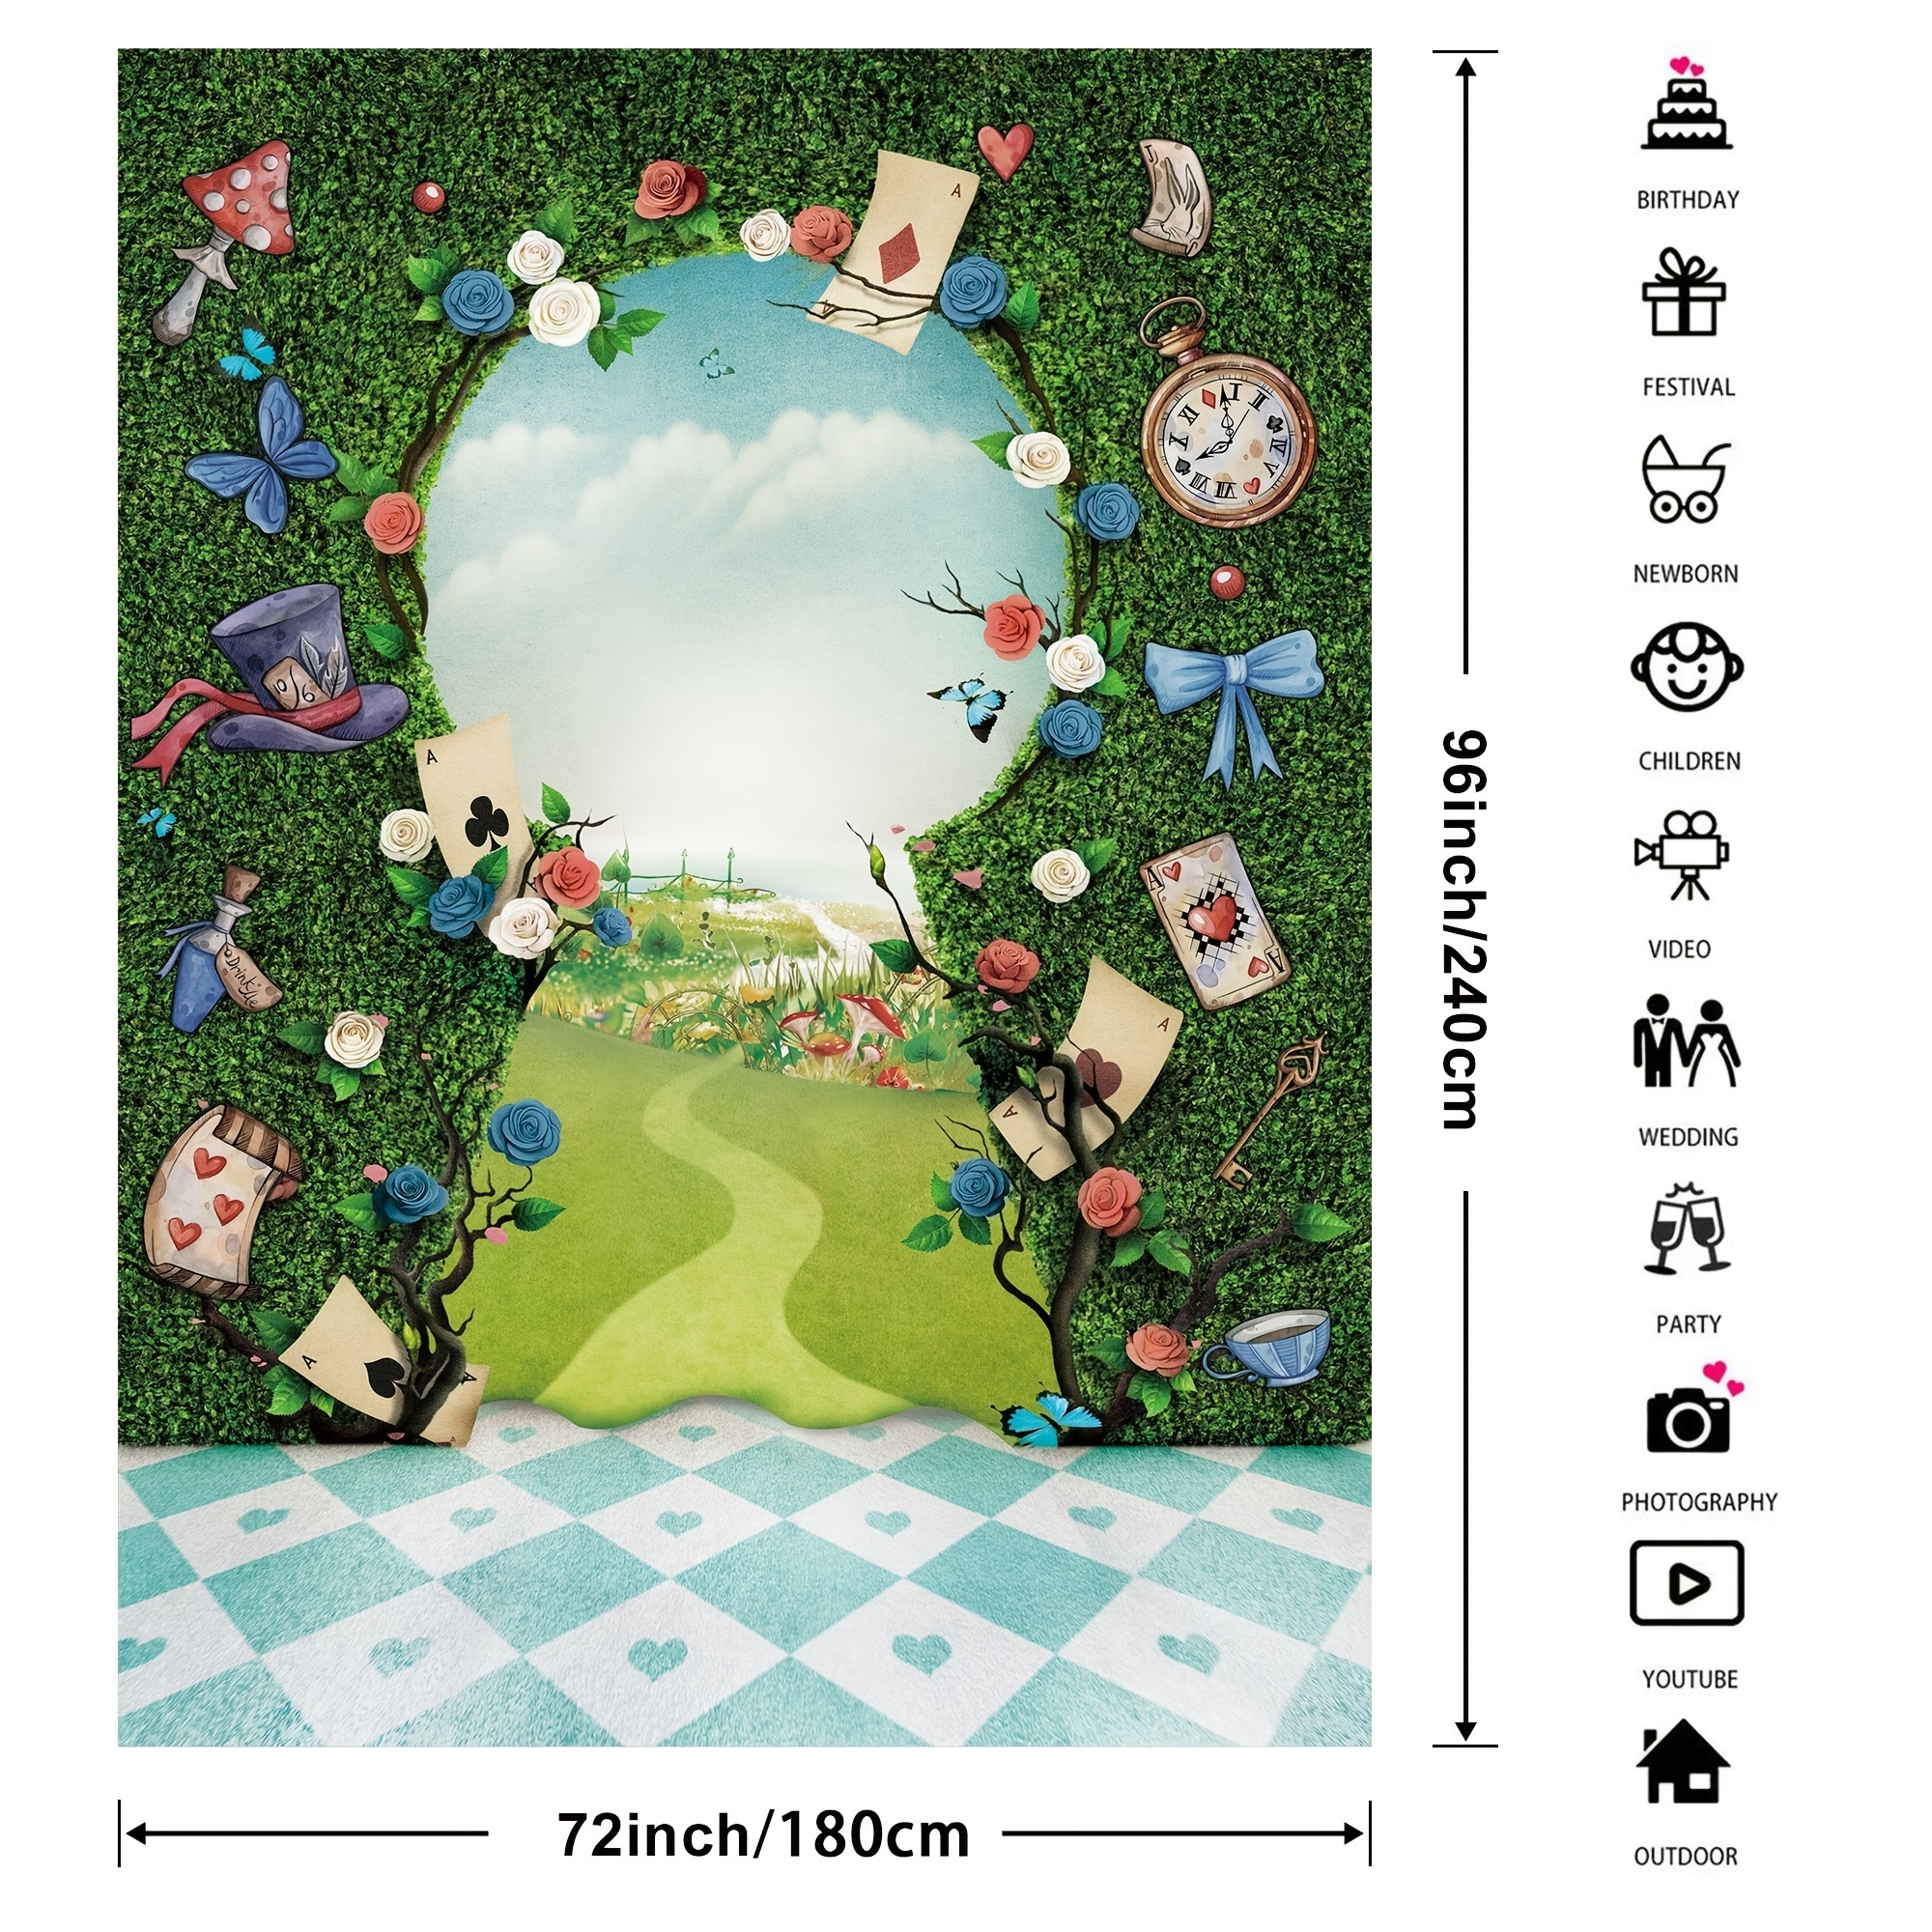 Alice in Wonderland Party Decorations / Backdrop for Sale in